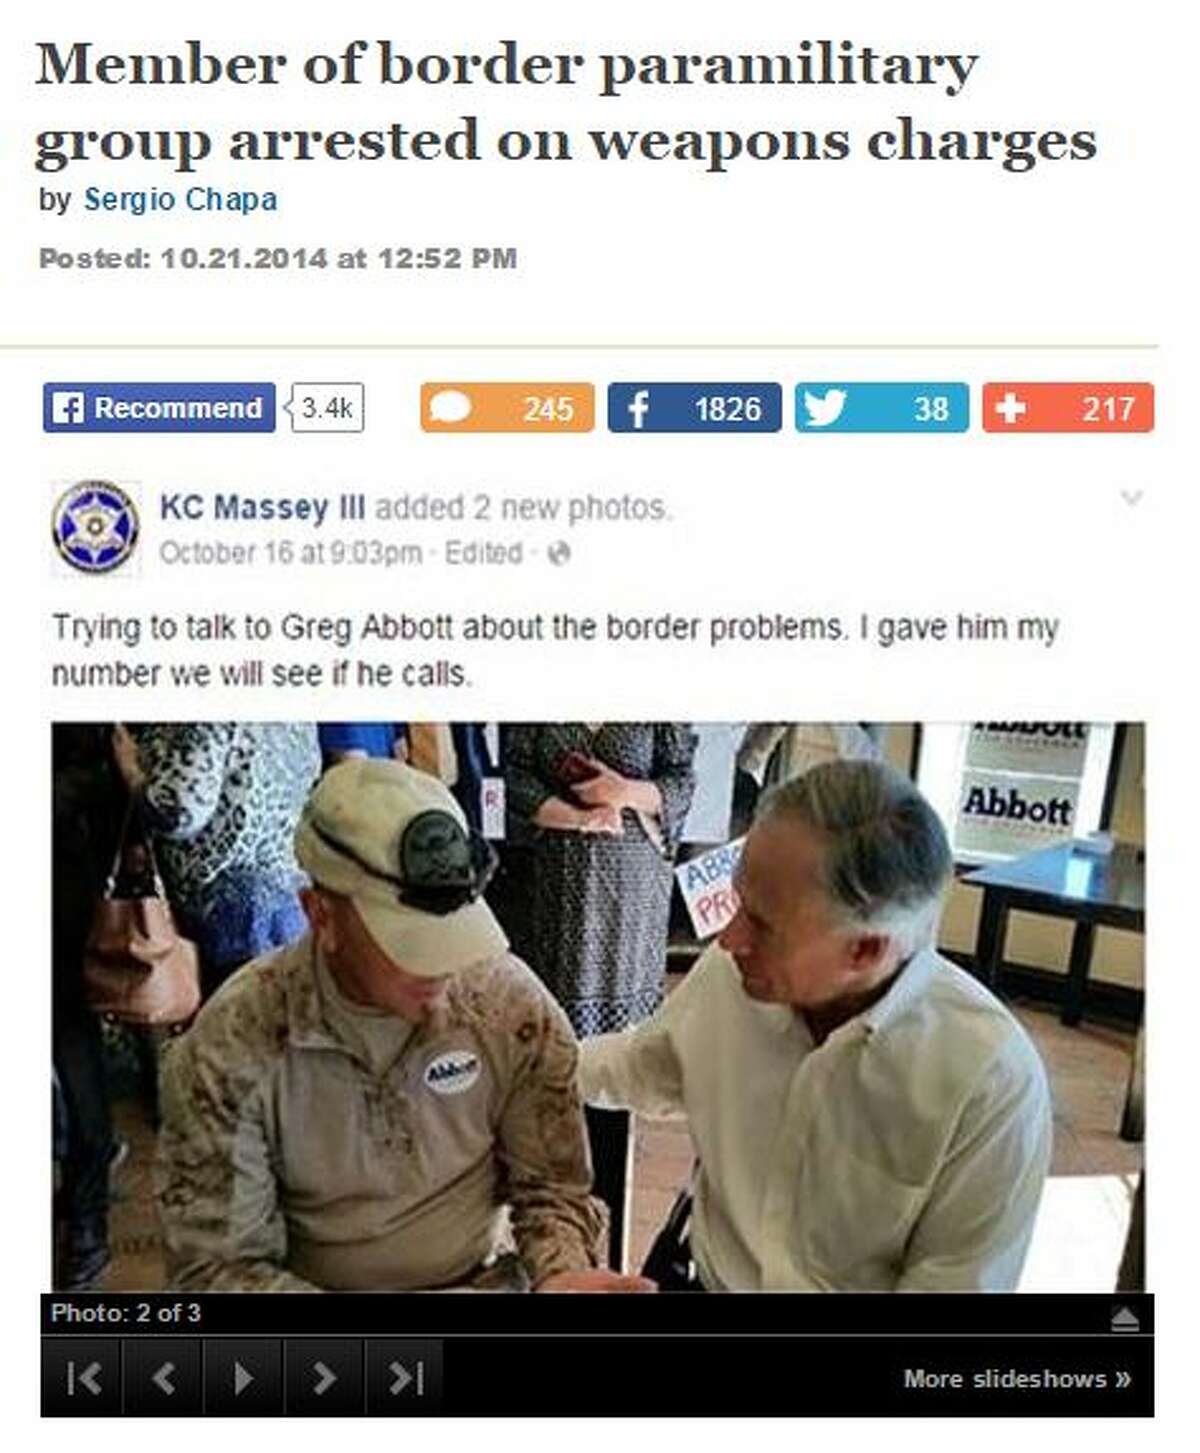 Republican gubernatorial candidate Greg Abbott is seen posing with border militia member Kevin Lyndel Massey at an Oct. 16 campaign event in Brownsville. Four days later, federal authorities arrested Massey on federal weapons charges and found a weapons cache, including ammonium nitrate, in Massey's hotel room.